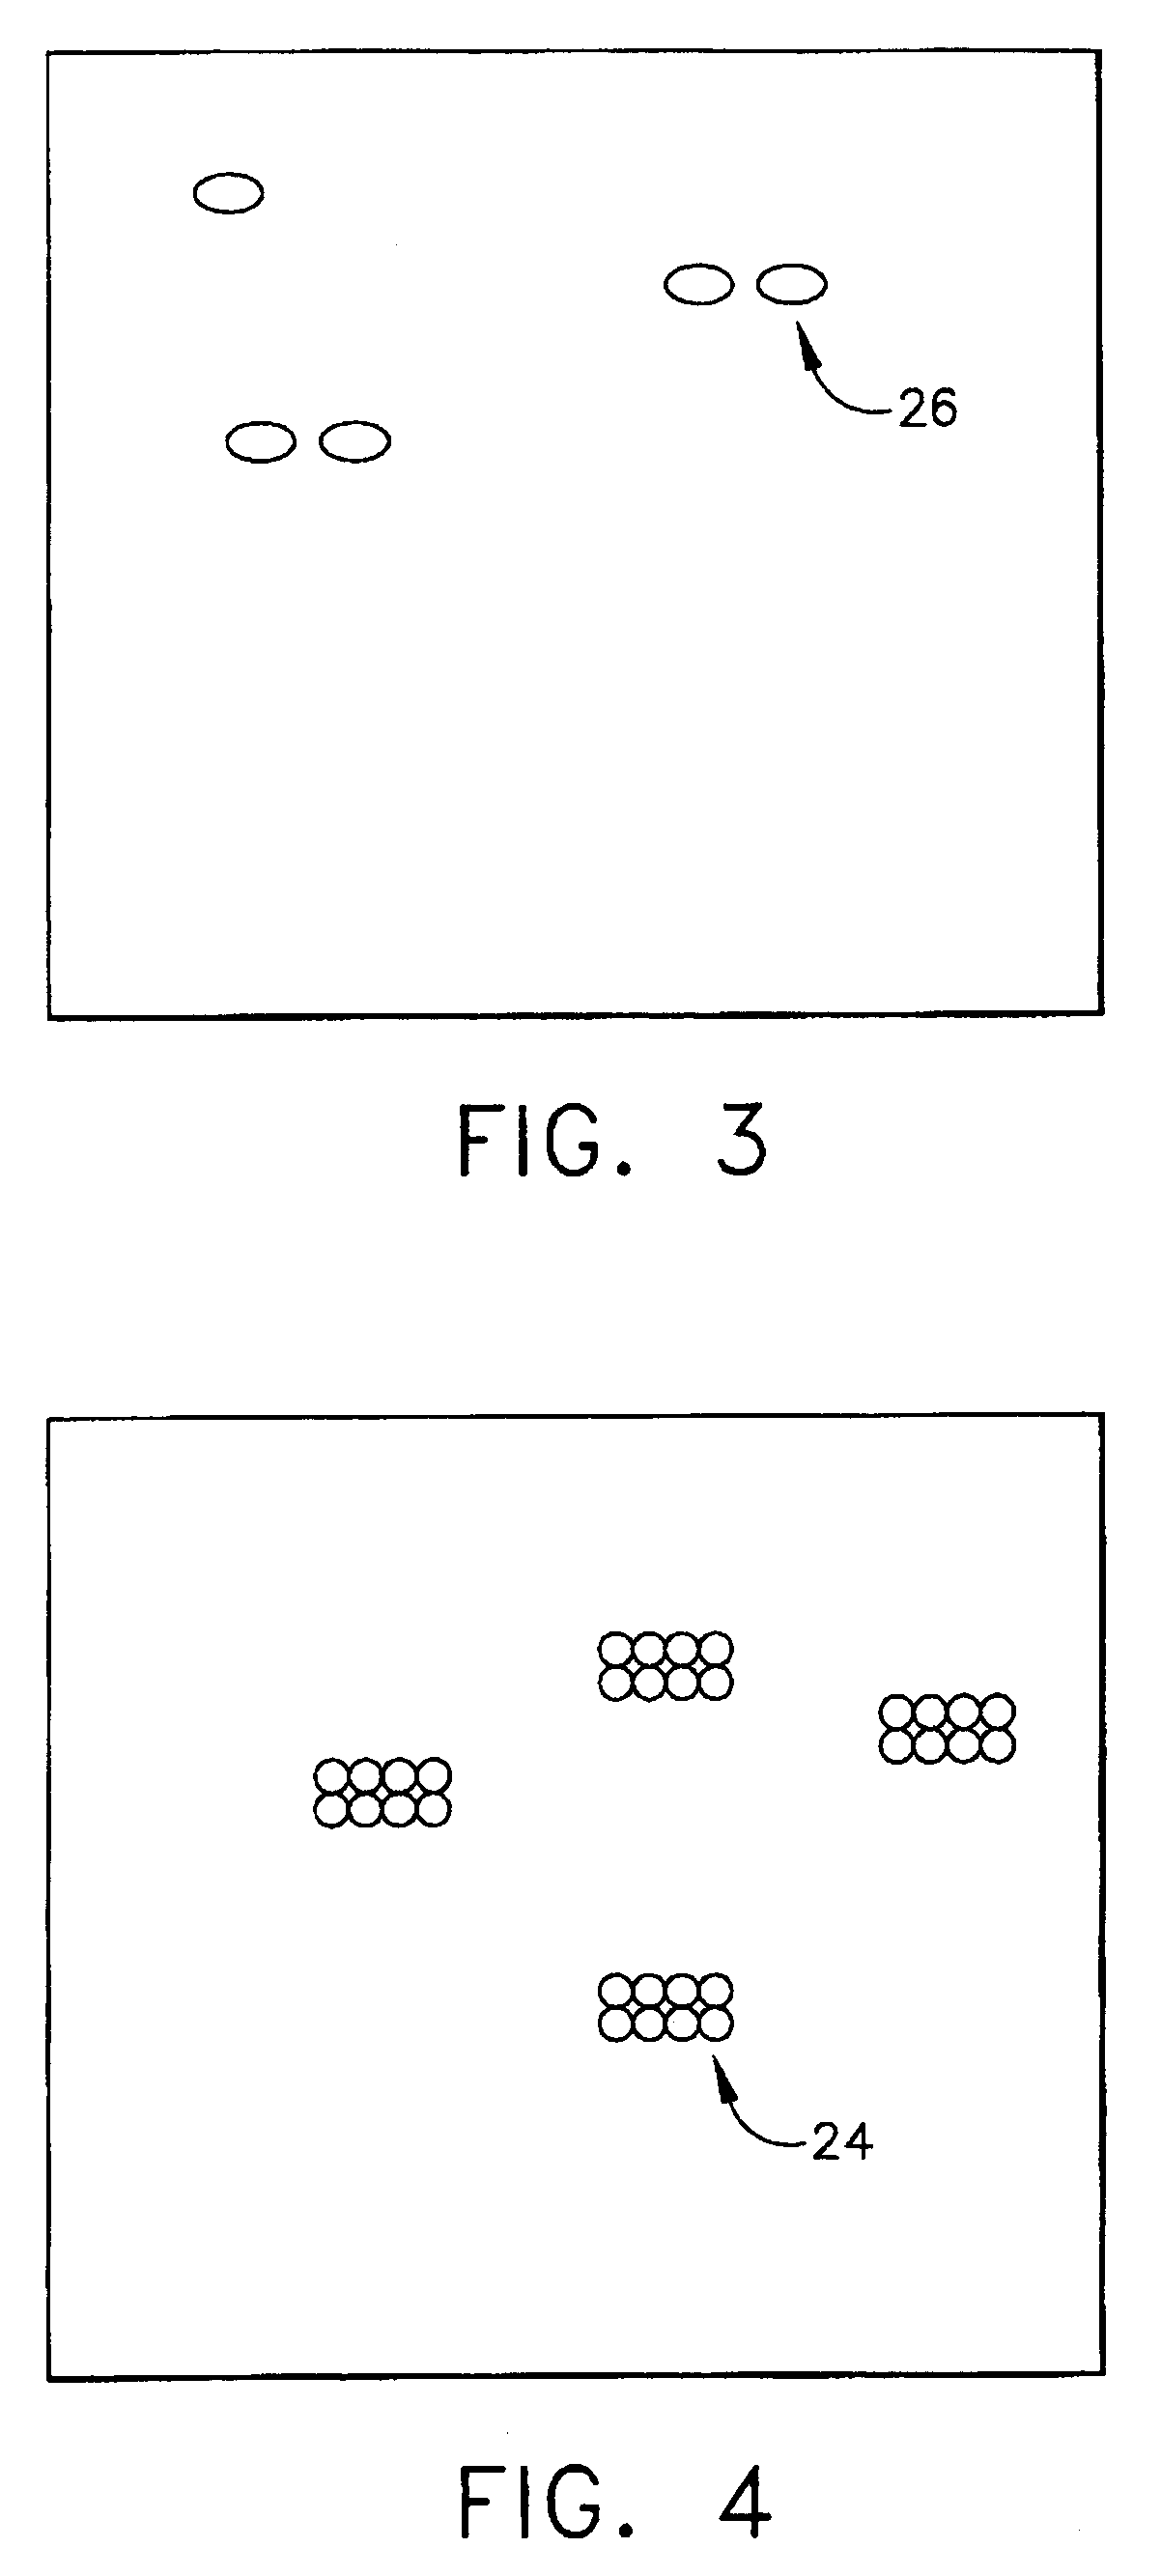 Fabrication of a high-strength steel article with inclusion control during melting